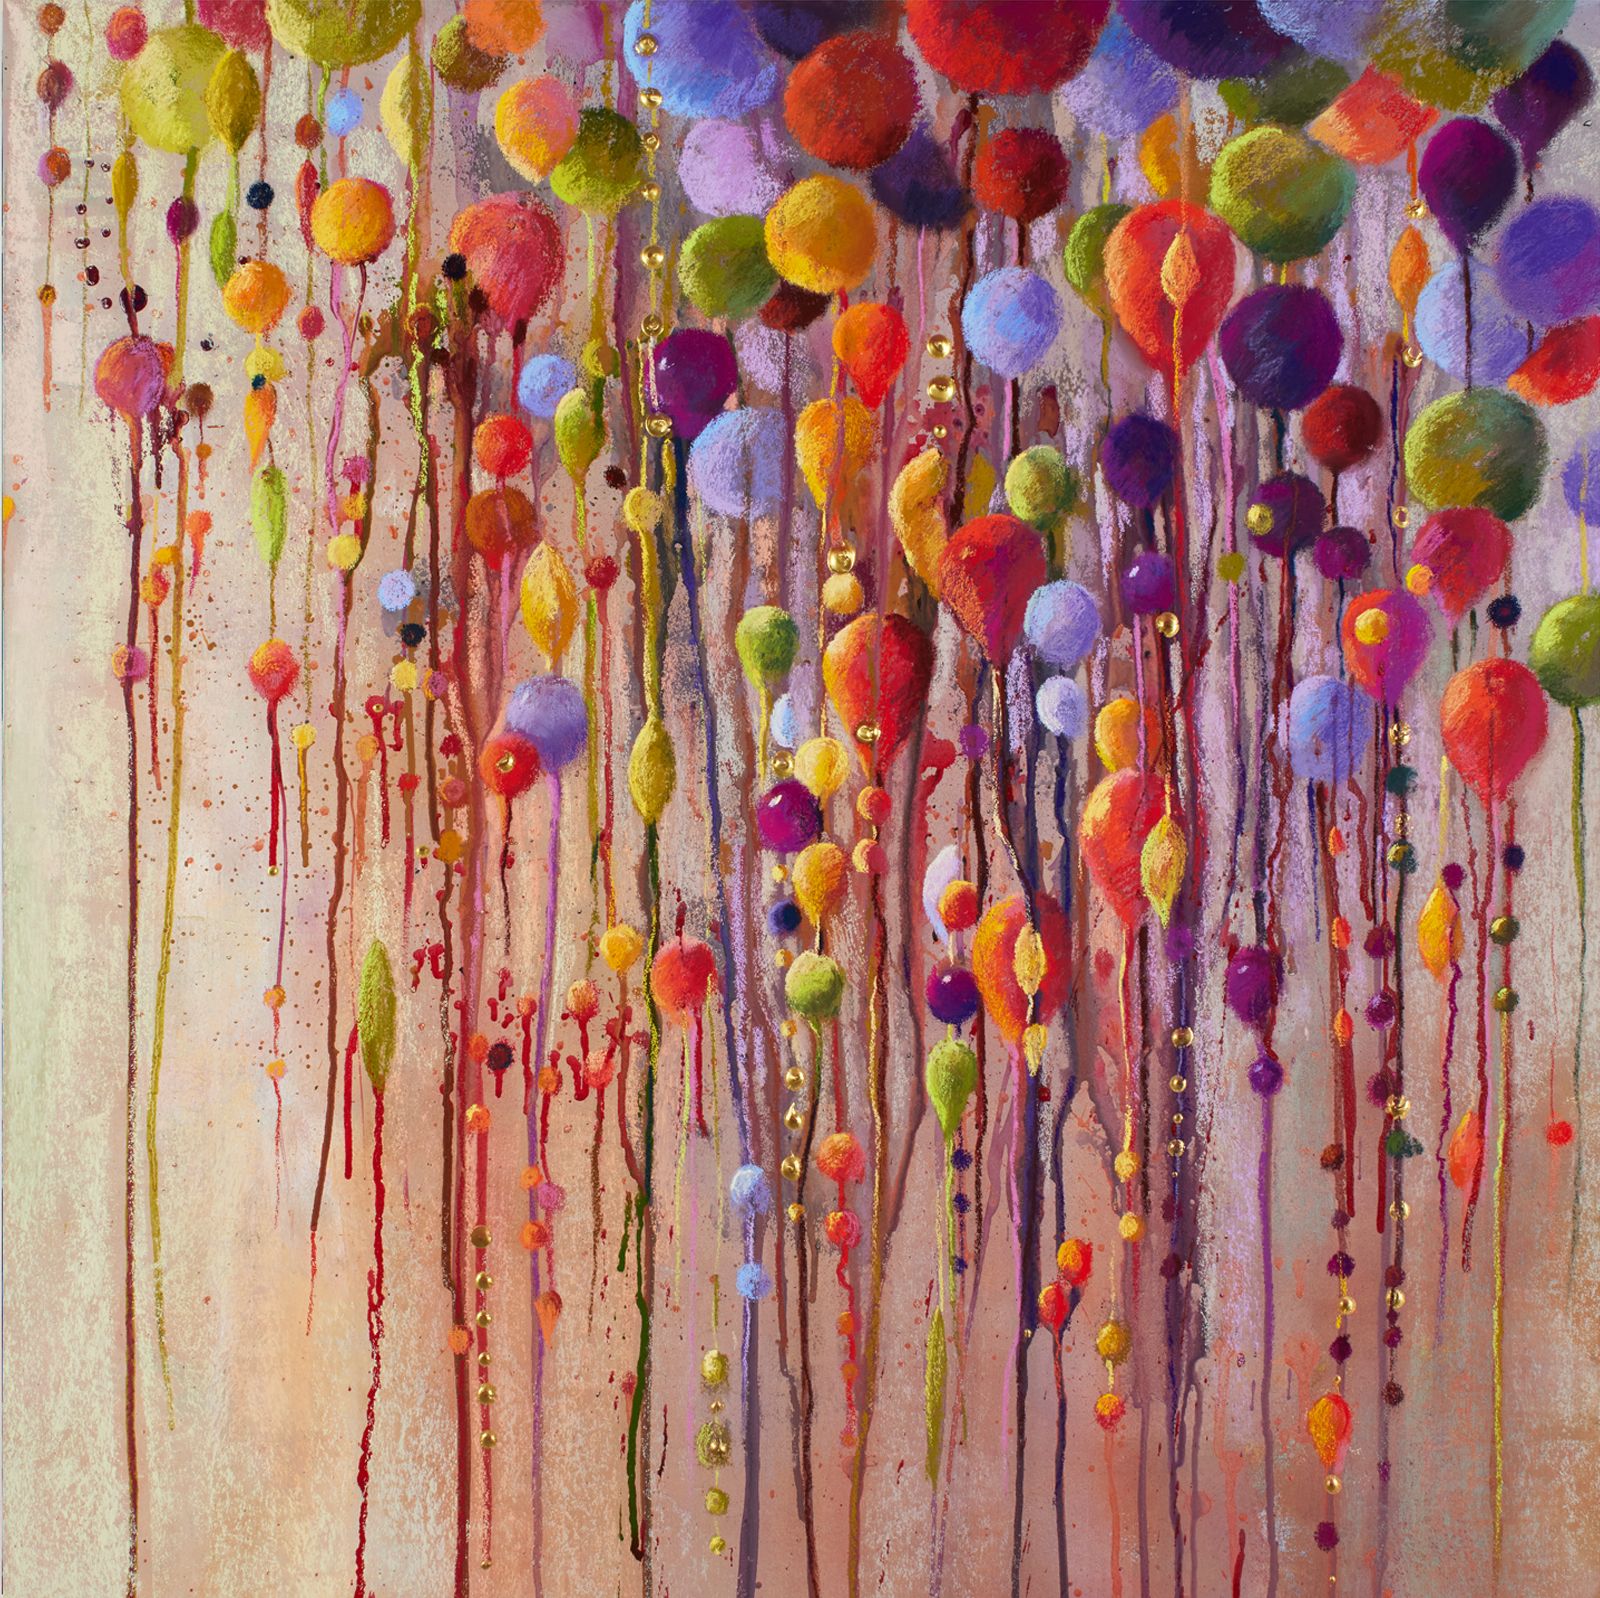 99 Red Balloons by Nel Whatmore